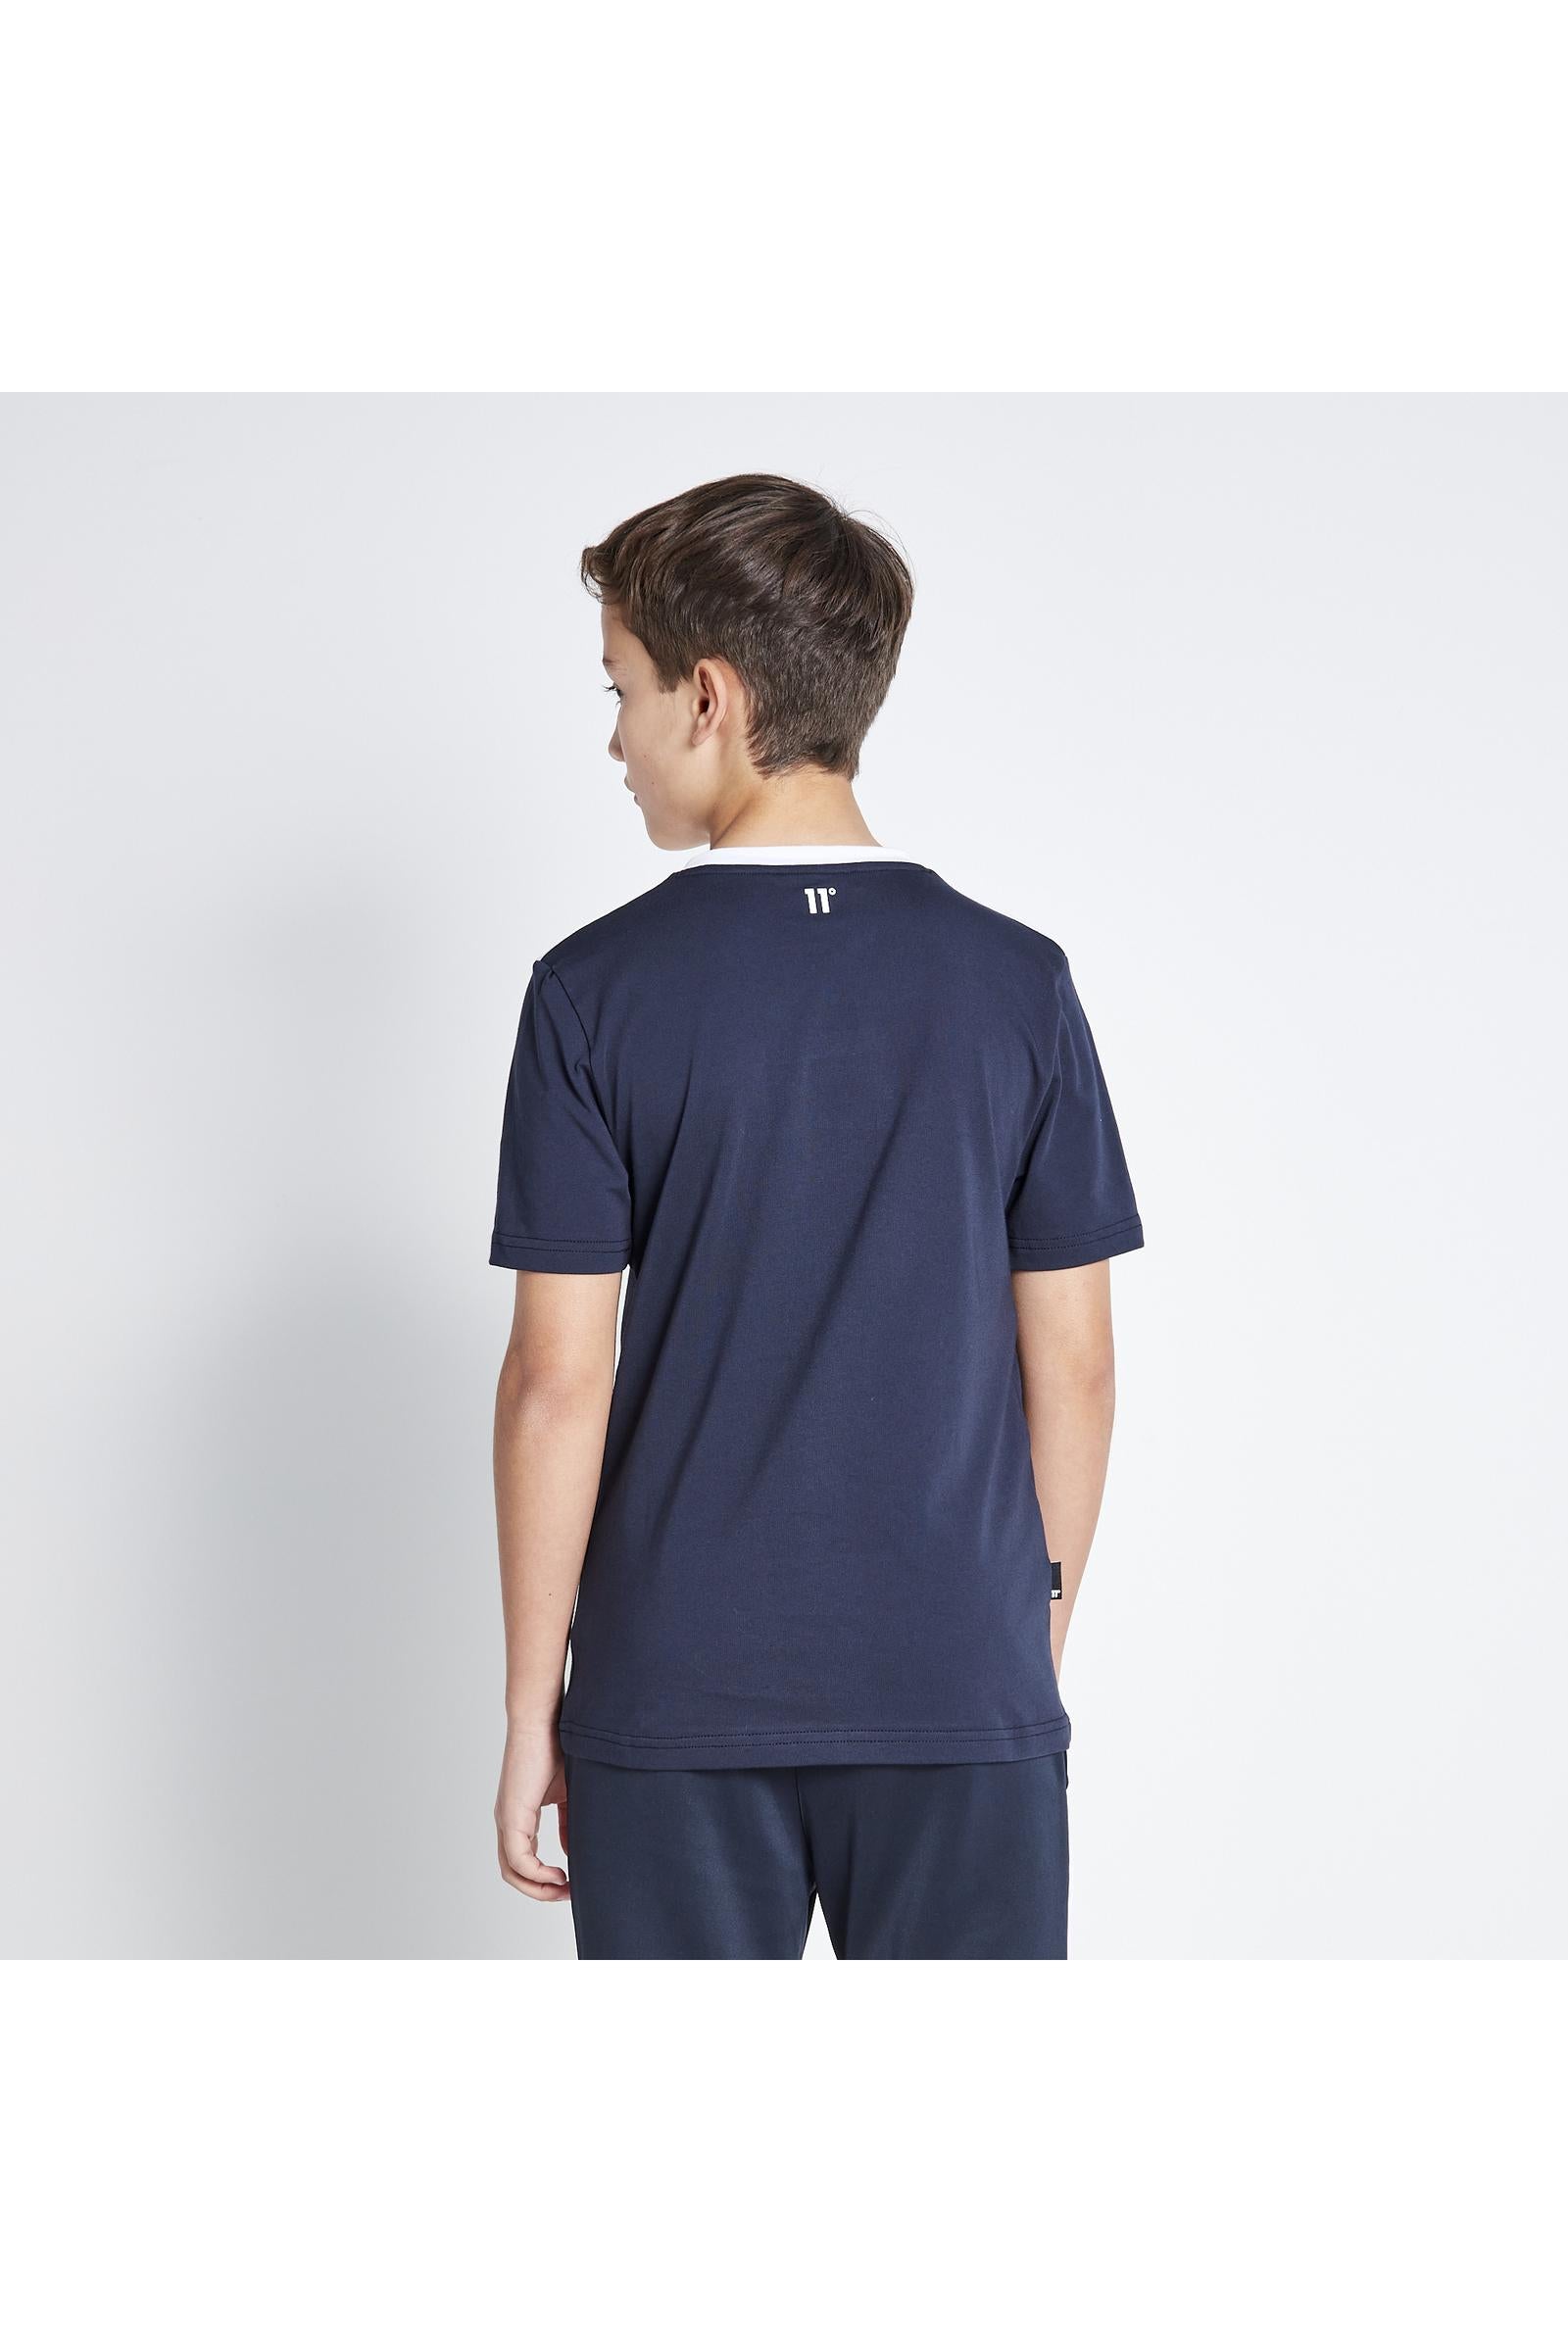 Junior Colour Block Taped T-Shirt - Navy / Steel / White-Back view